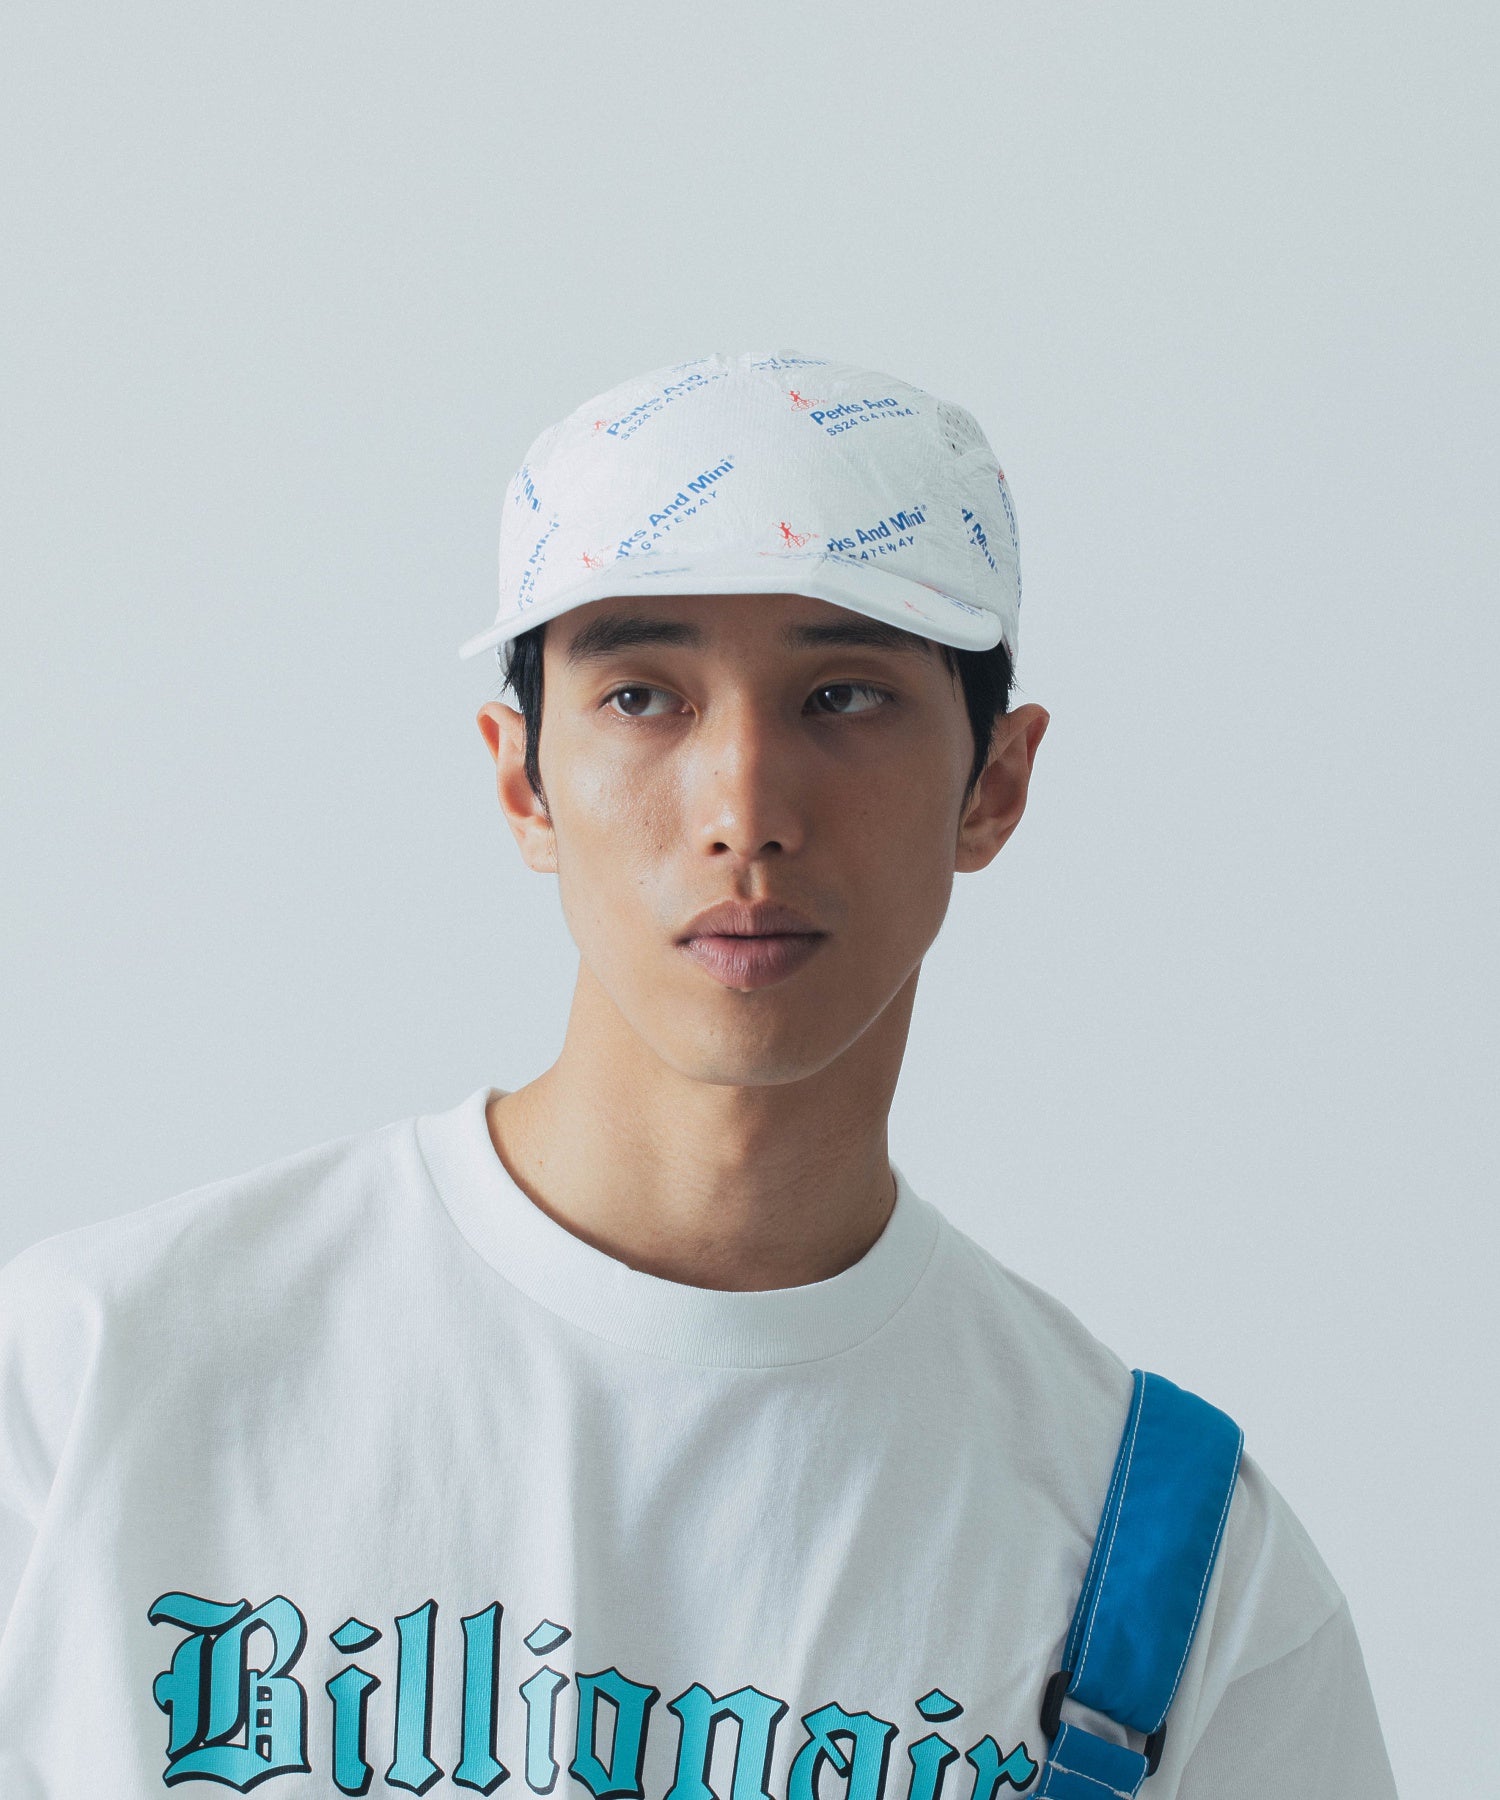 PERKS AND MINI/パークスアンドミニ/WRAPPING FOLDABLE CAP/10127